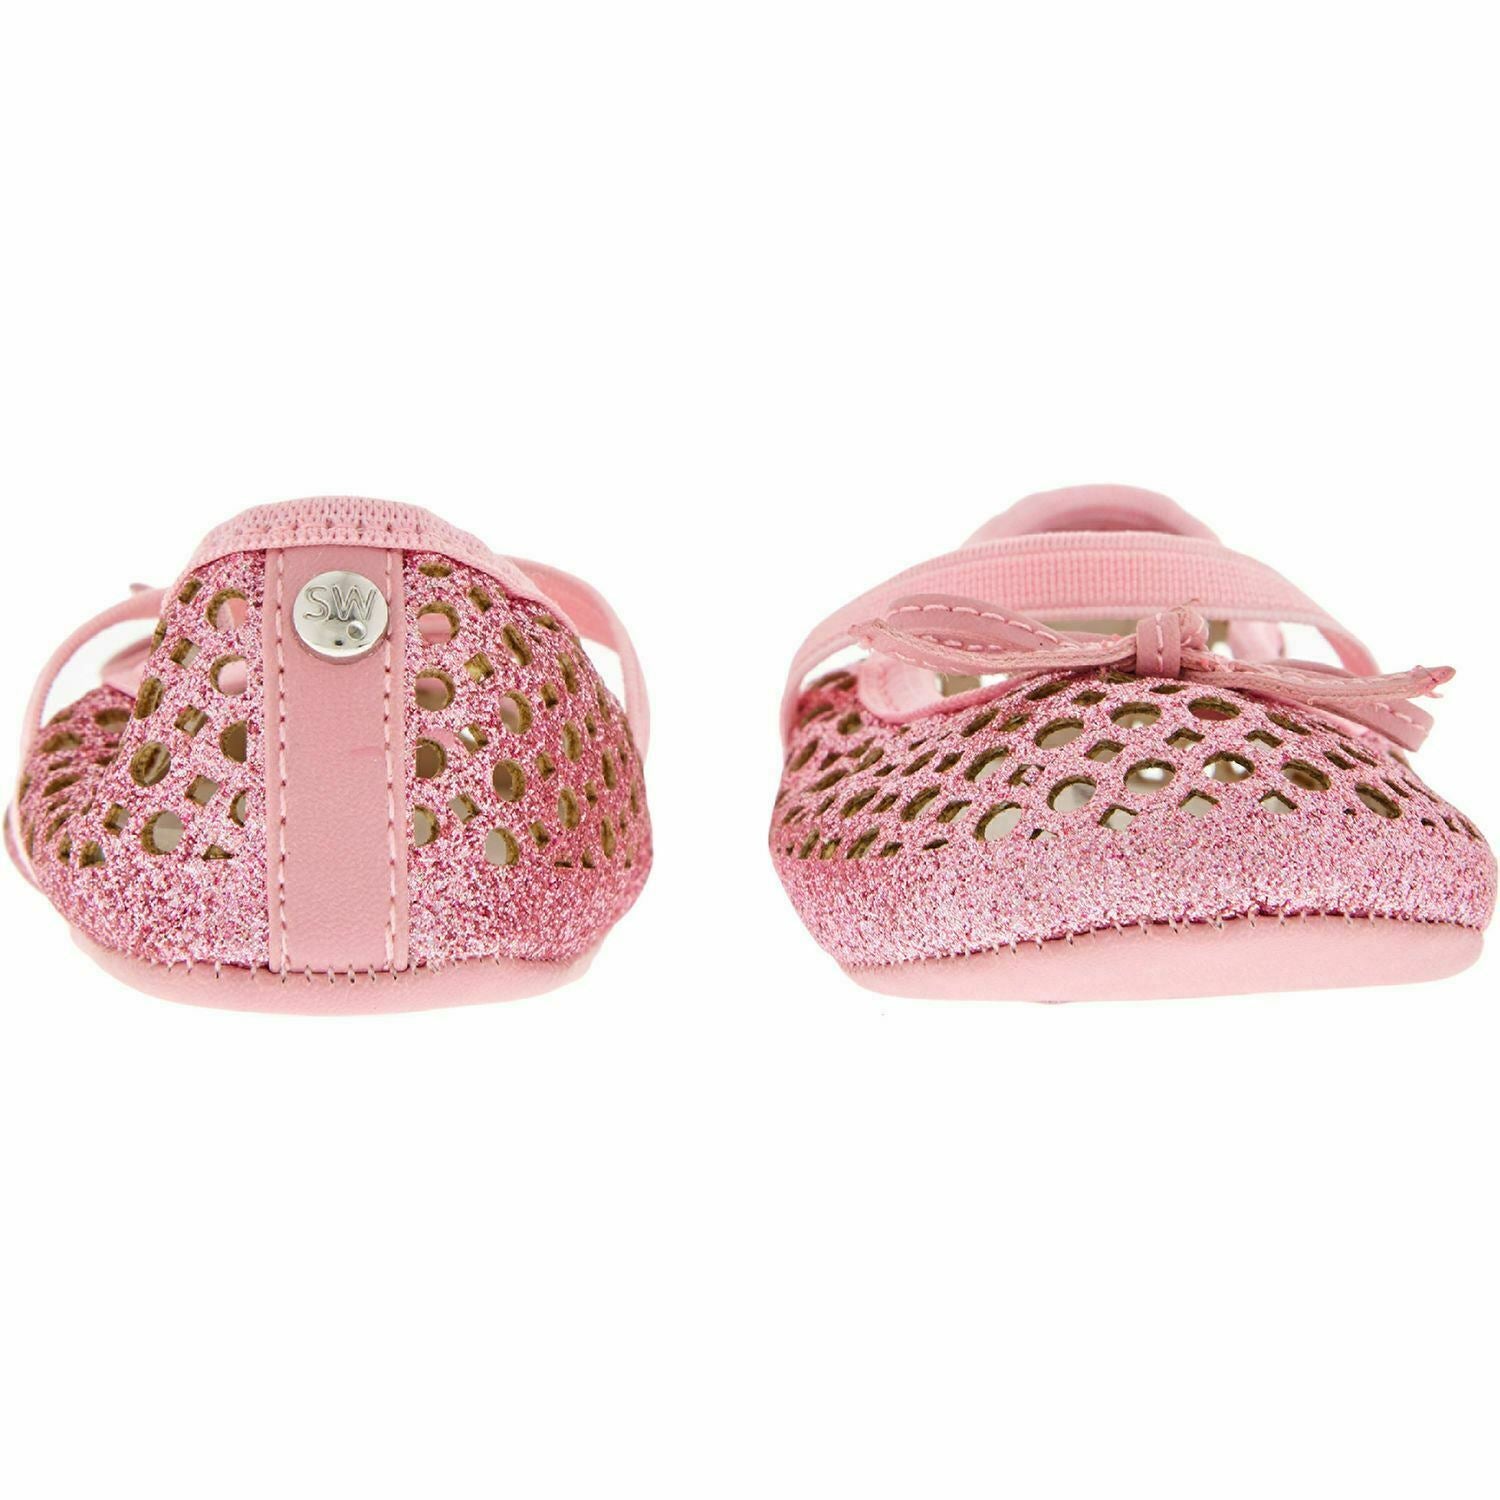 STUART WEITZMAN Perf Perf Baby Girls' Shoes, Pink, 3 m to 6 months